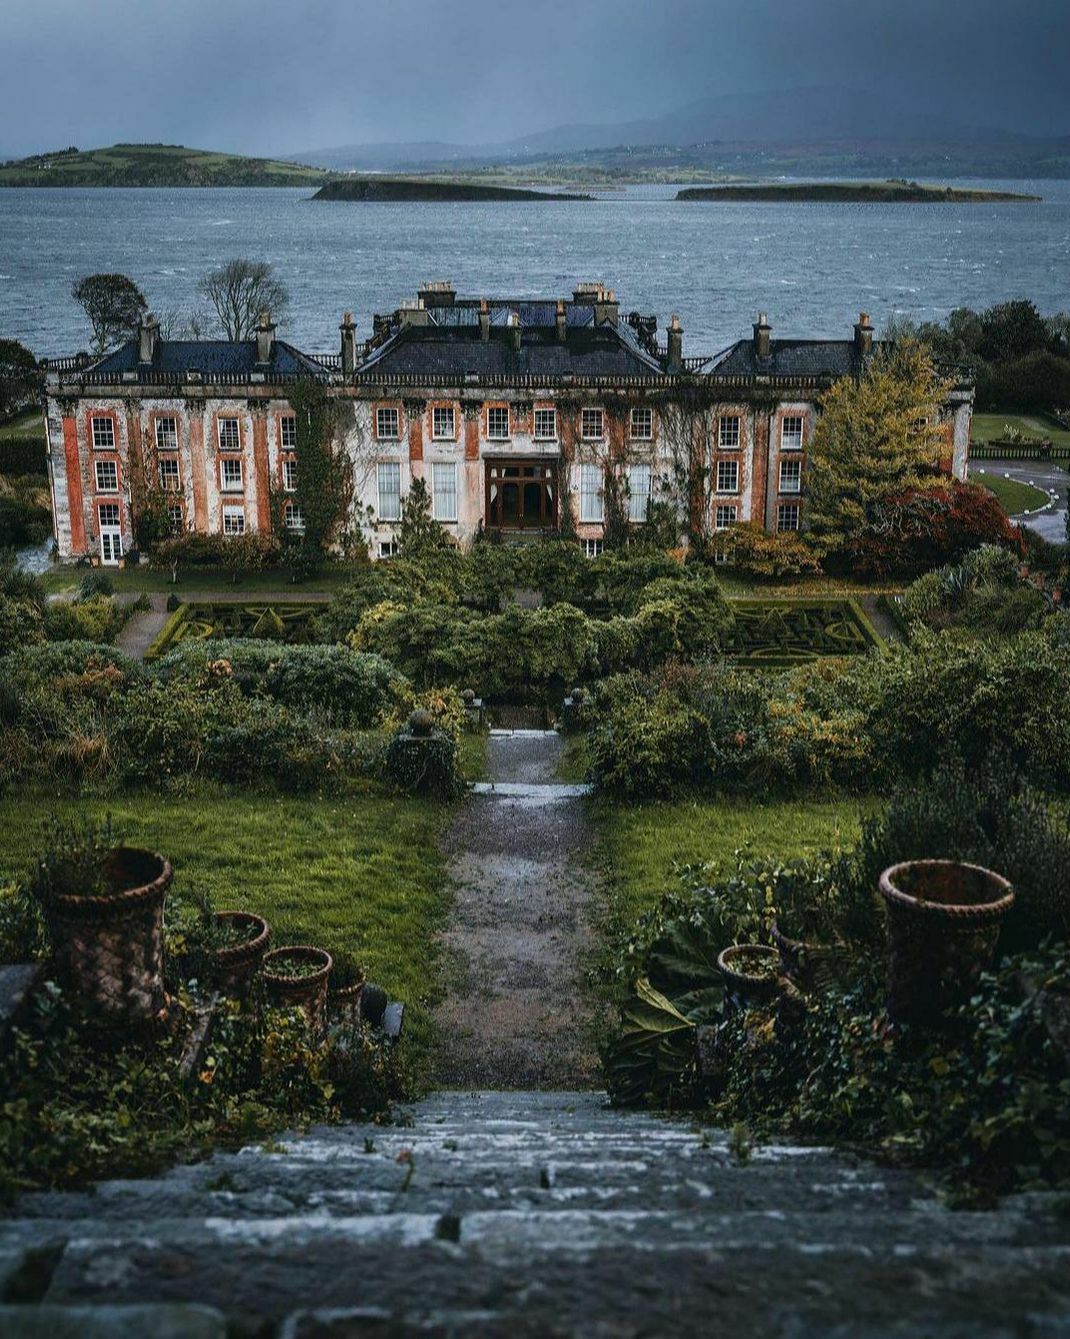 The 18th Century Bantry House Overlooking Bantry Bay, County Cork, Ireland